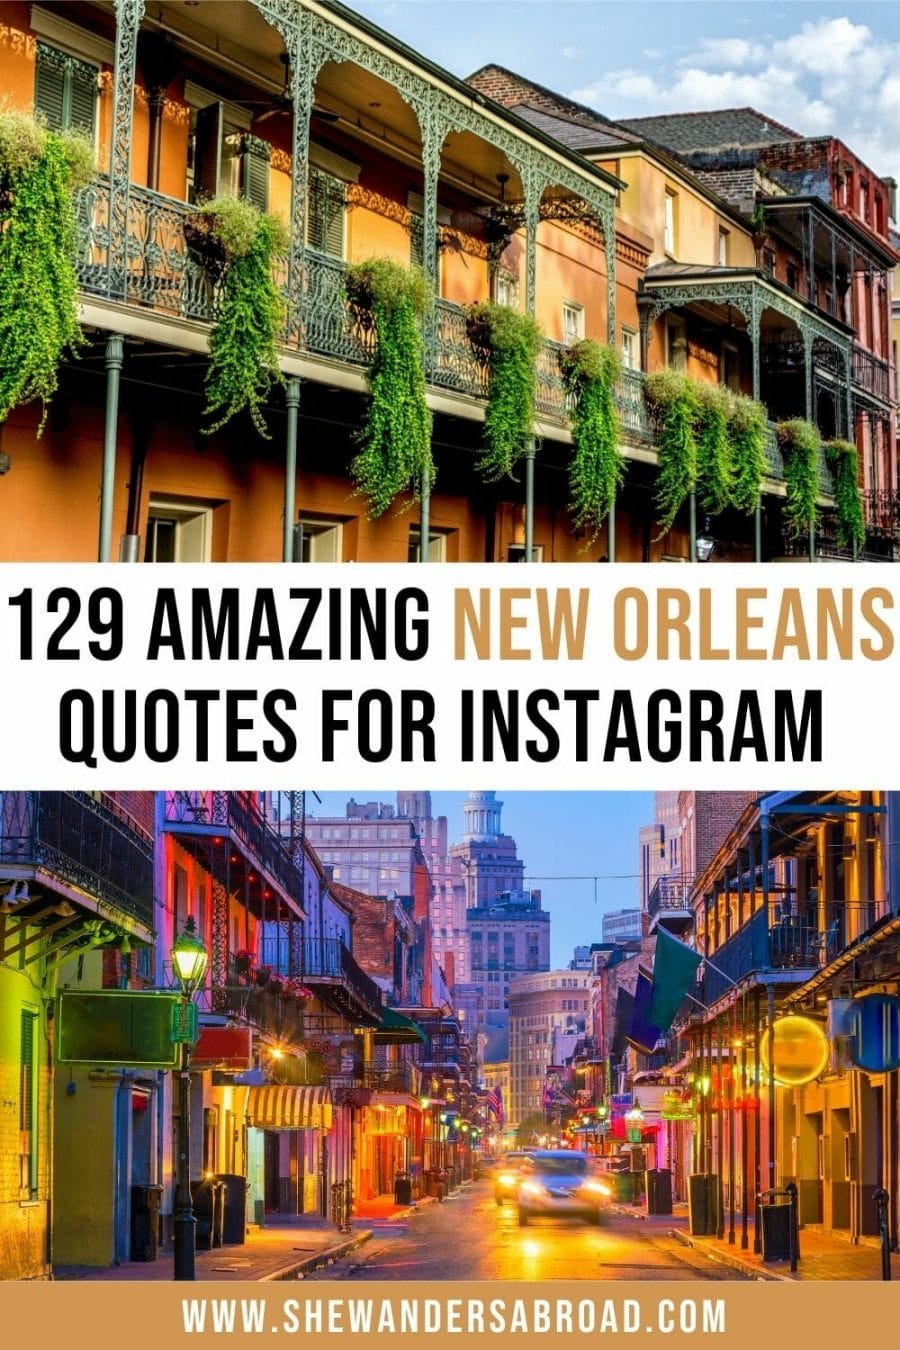 New Orleans Captions for Instagram